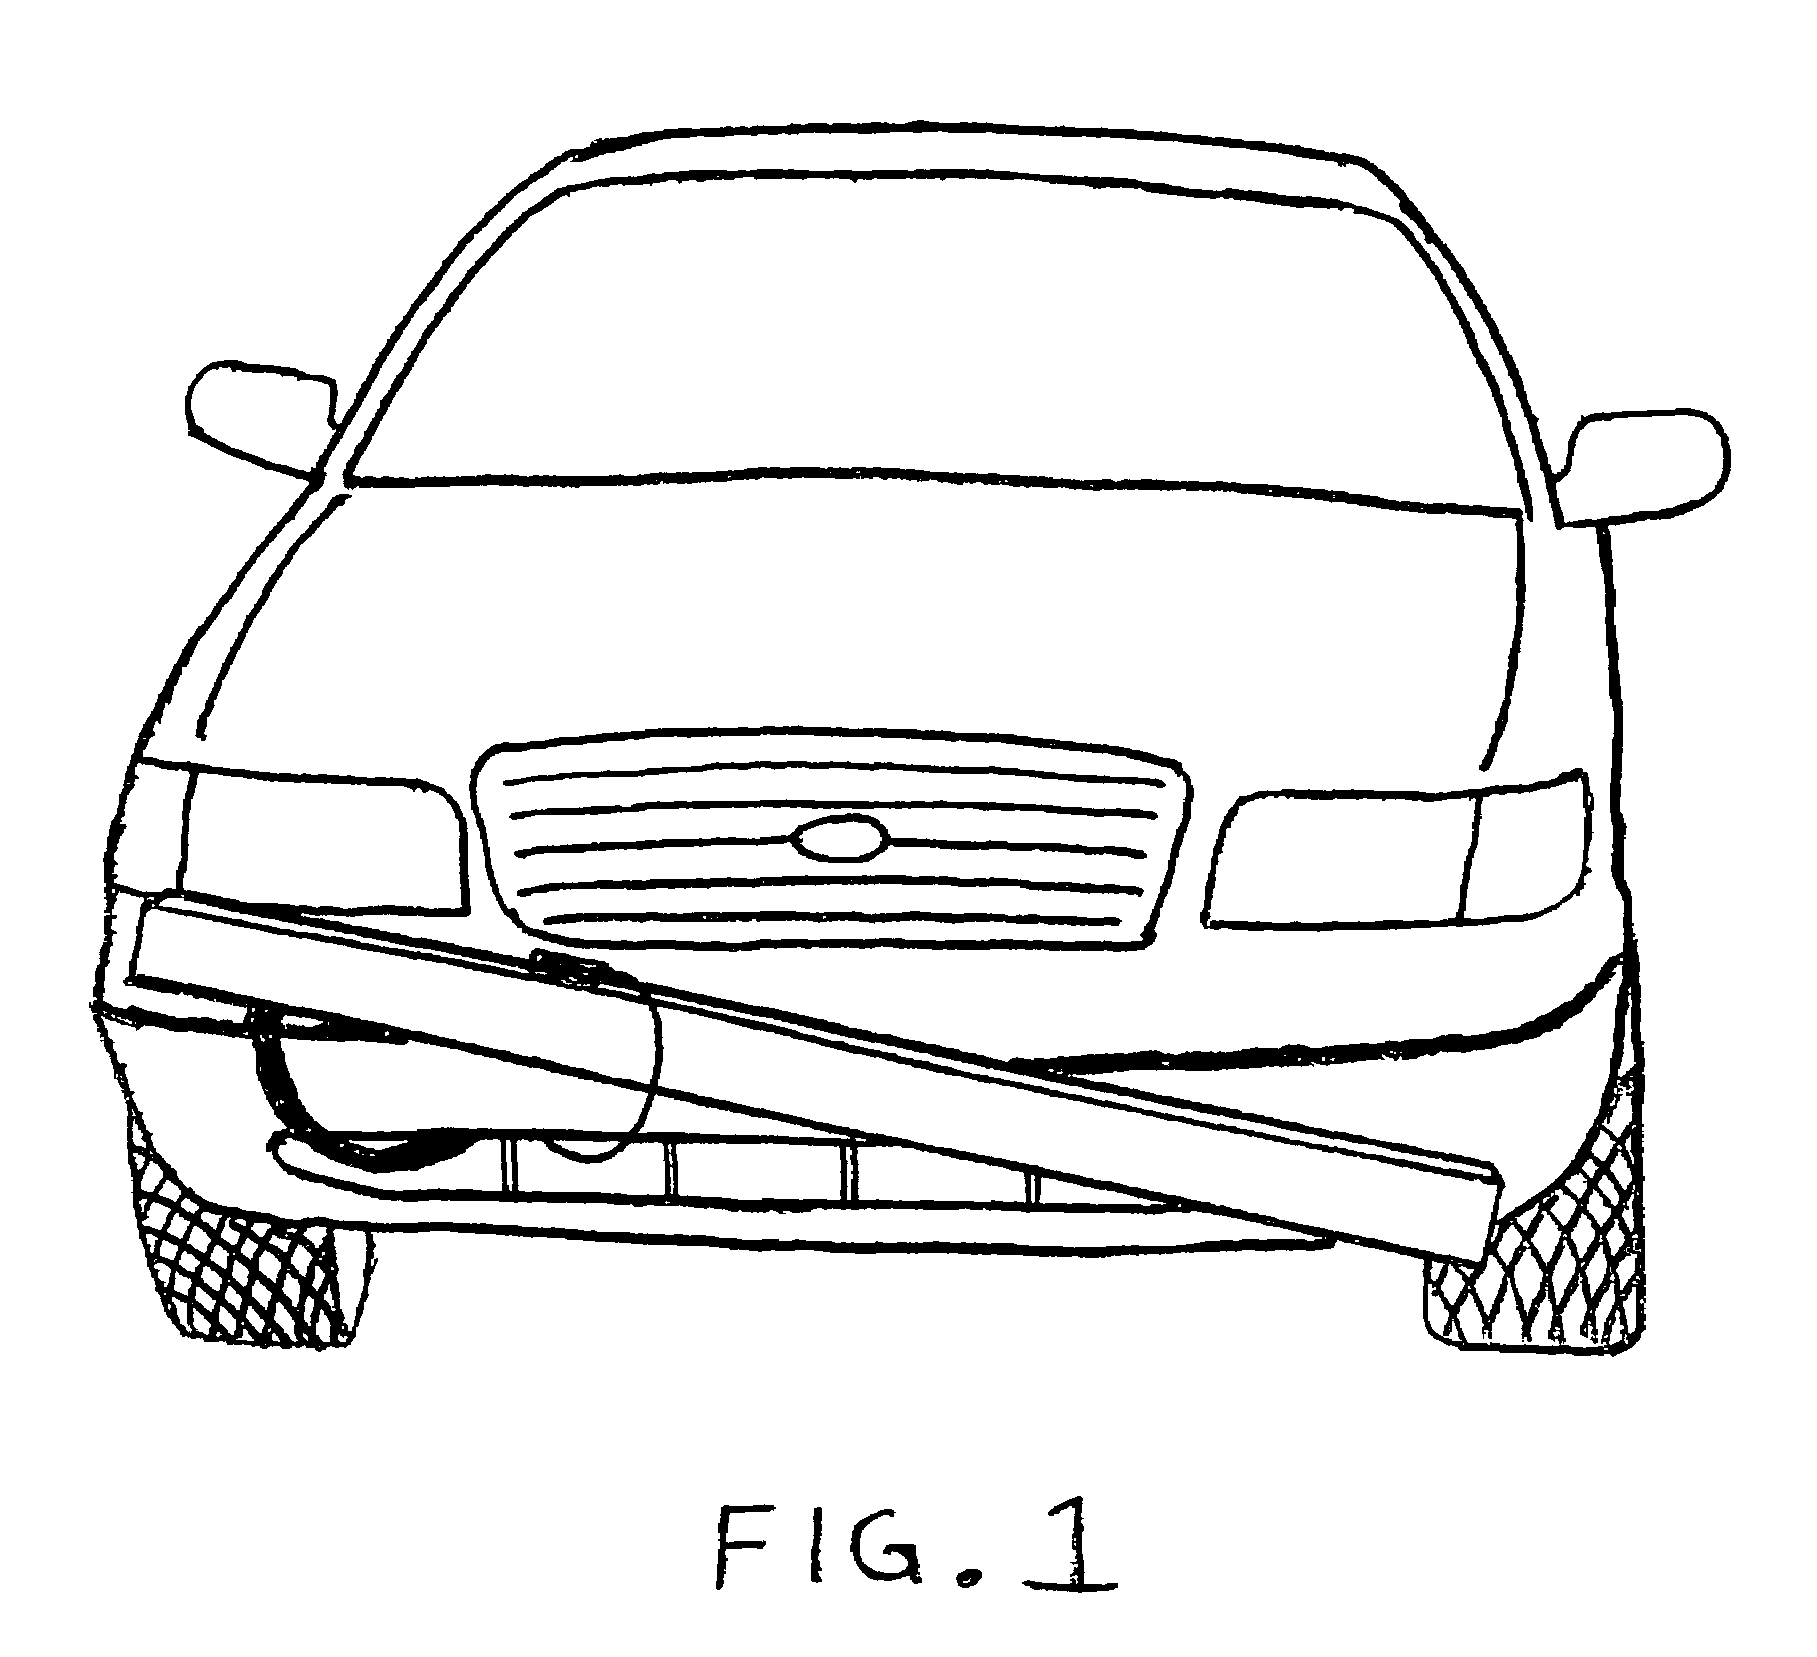 Mobile, retractile, lateral deploying, vehicle disablement device